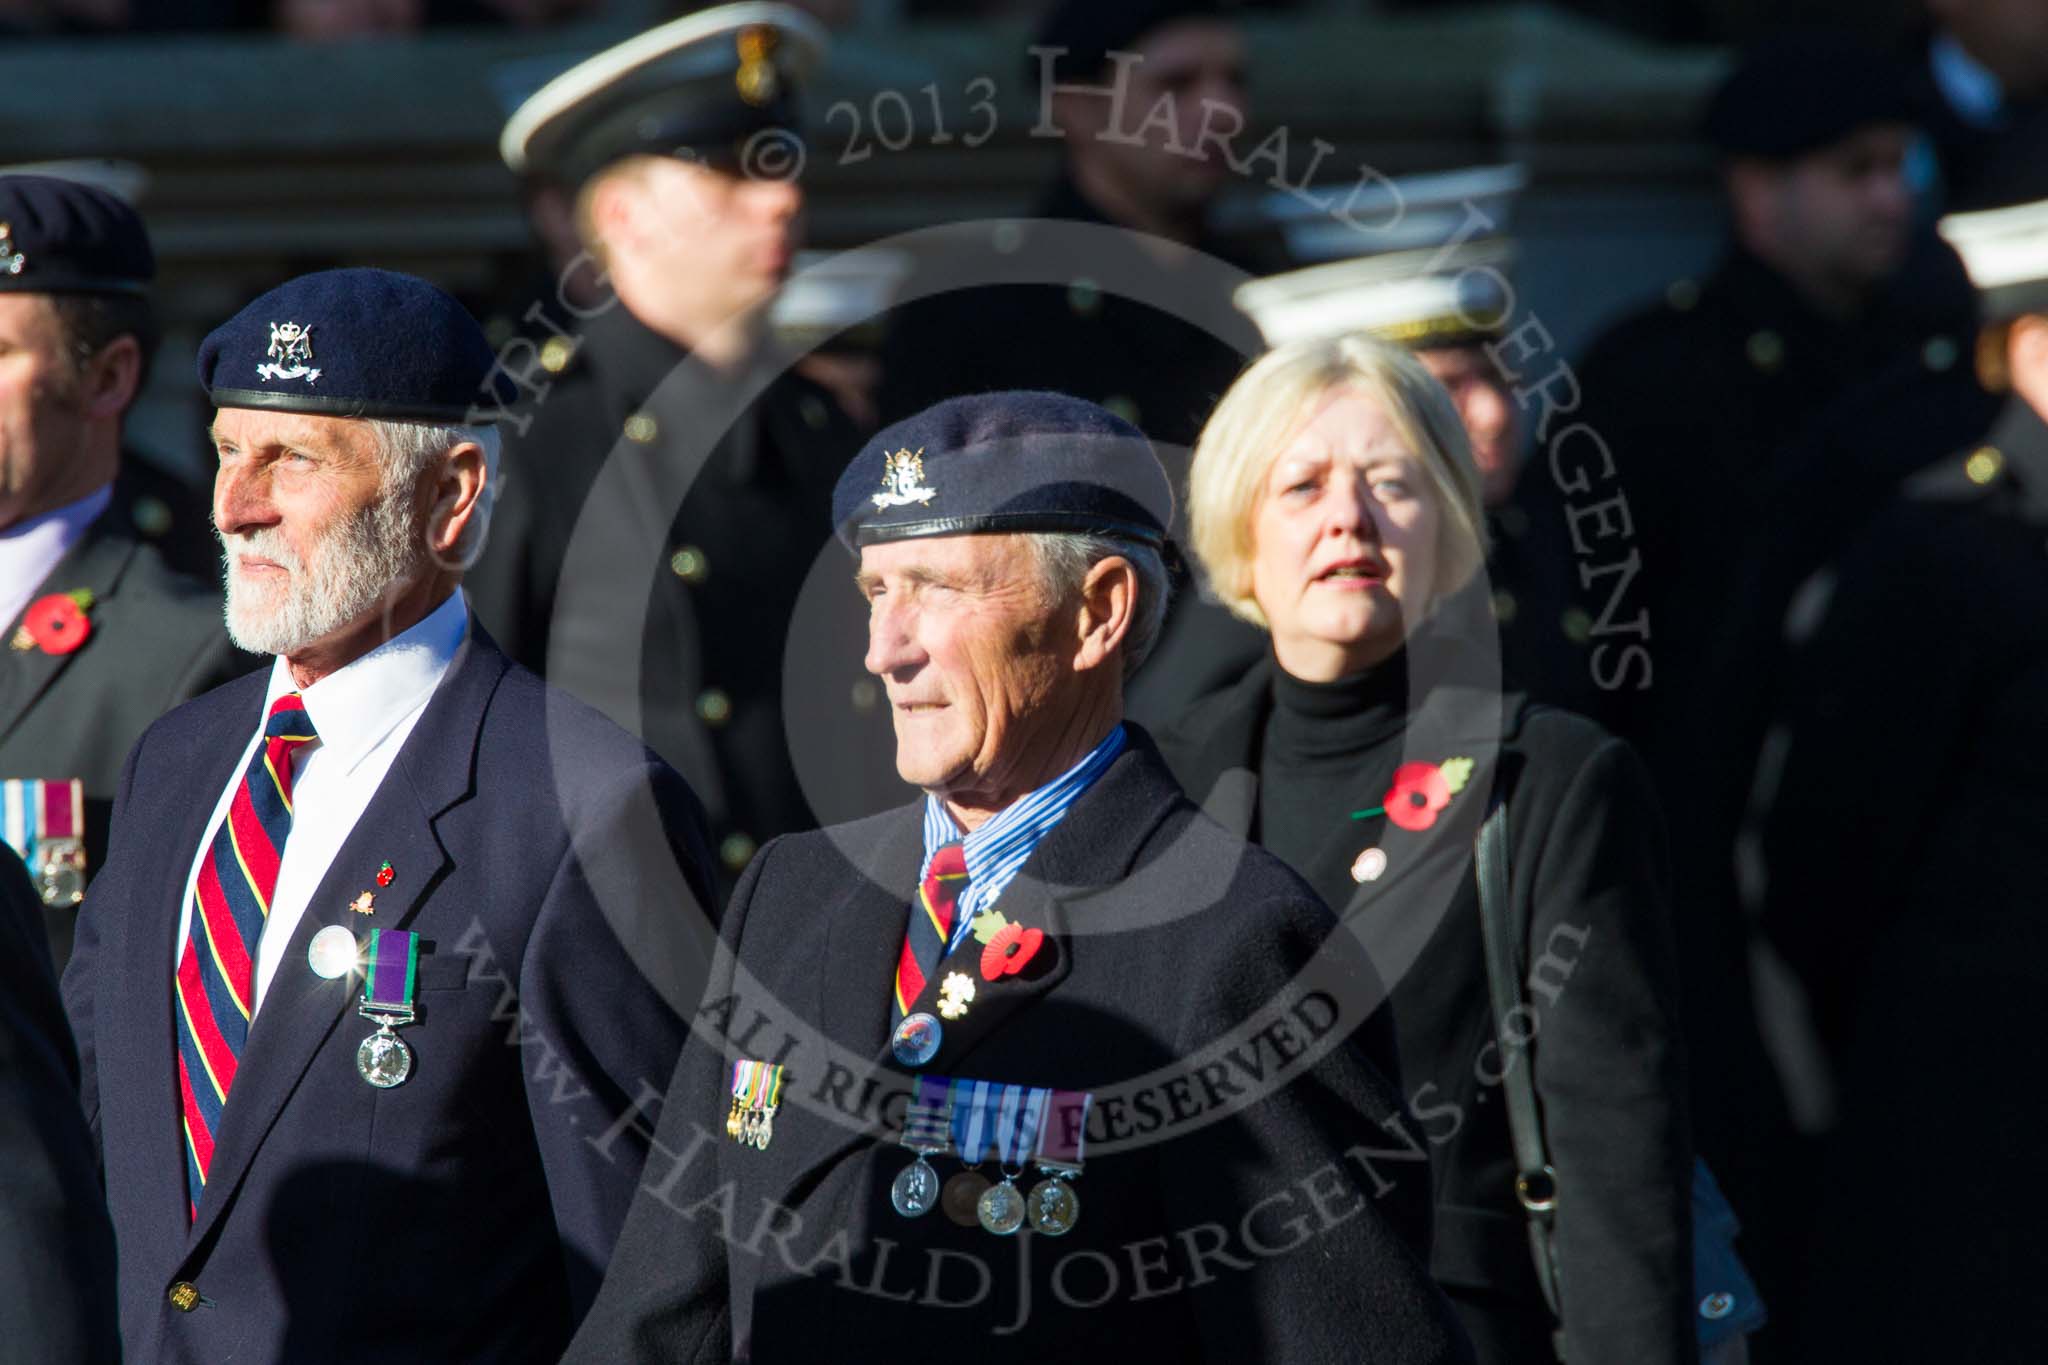 Remembrance Sunday at the Cenotaph in London 2014: Group B30 - 16/5th Queen's Royal Lancers.
Press stand opposite the Foreign Office building, Whitehall, London SW1,
London,
Greater London,
United Kingdom,
on 09 November 2014 at 12:13, image #1908